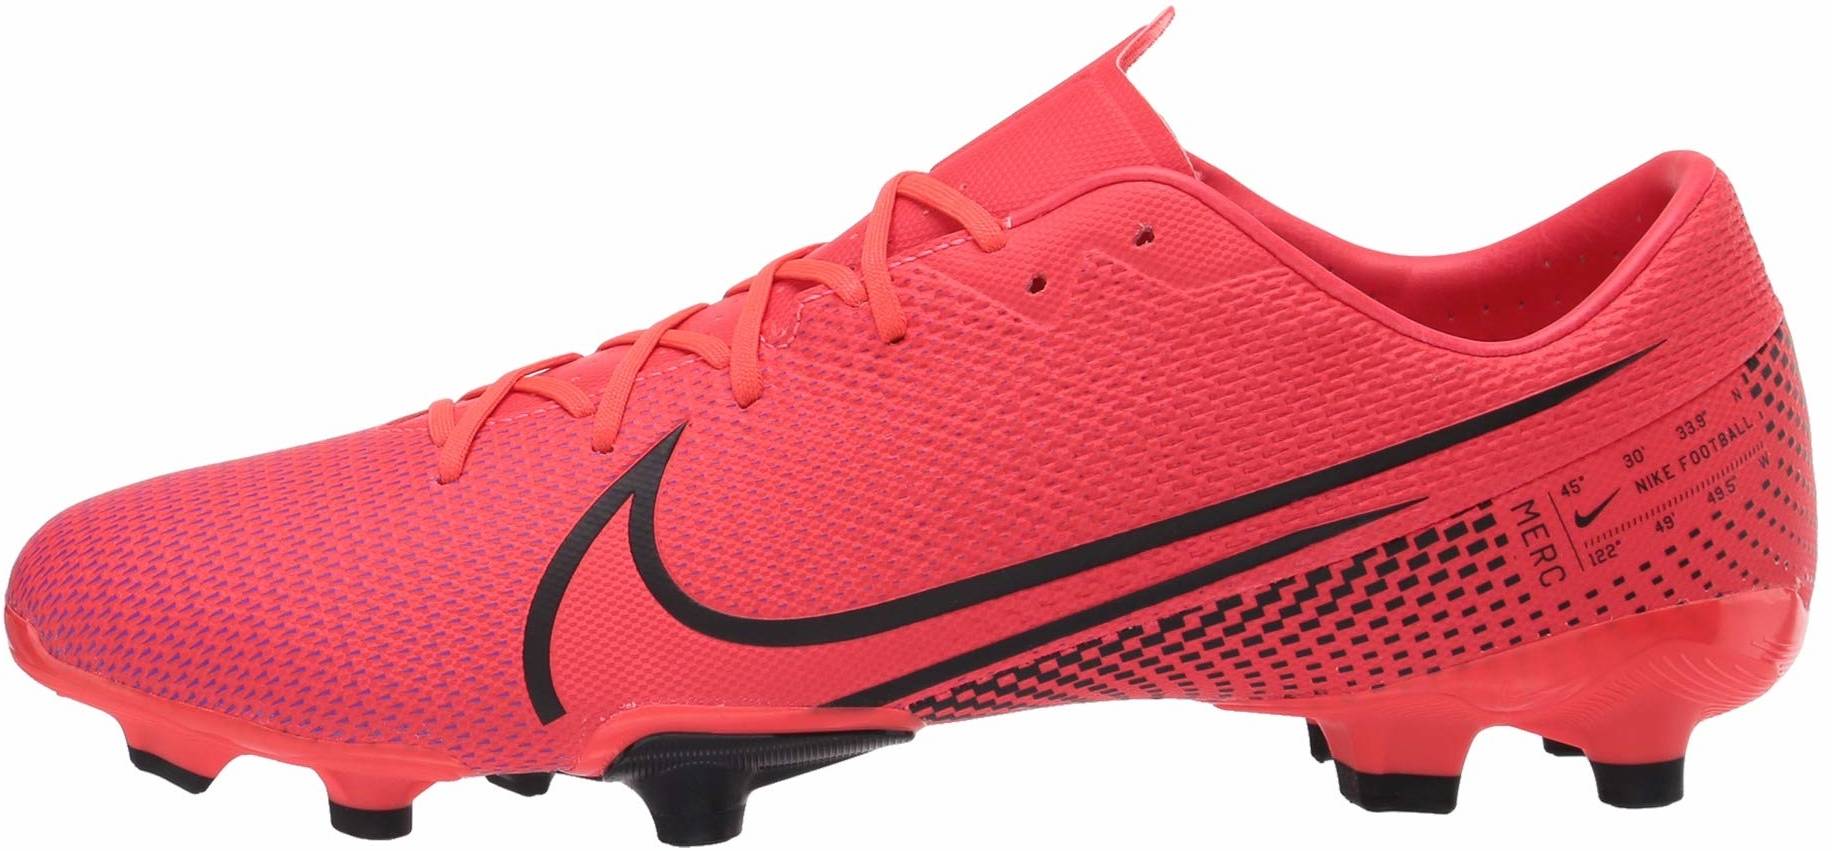 red soccer cleats nike